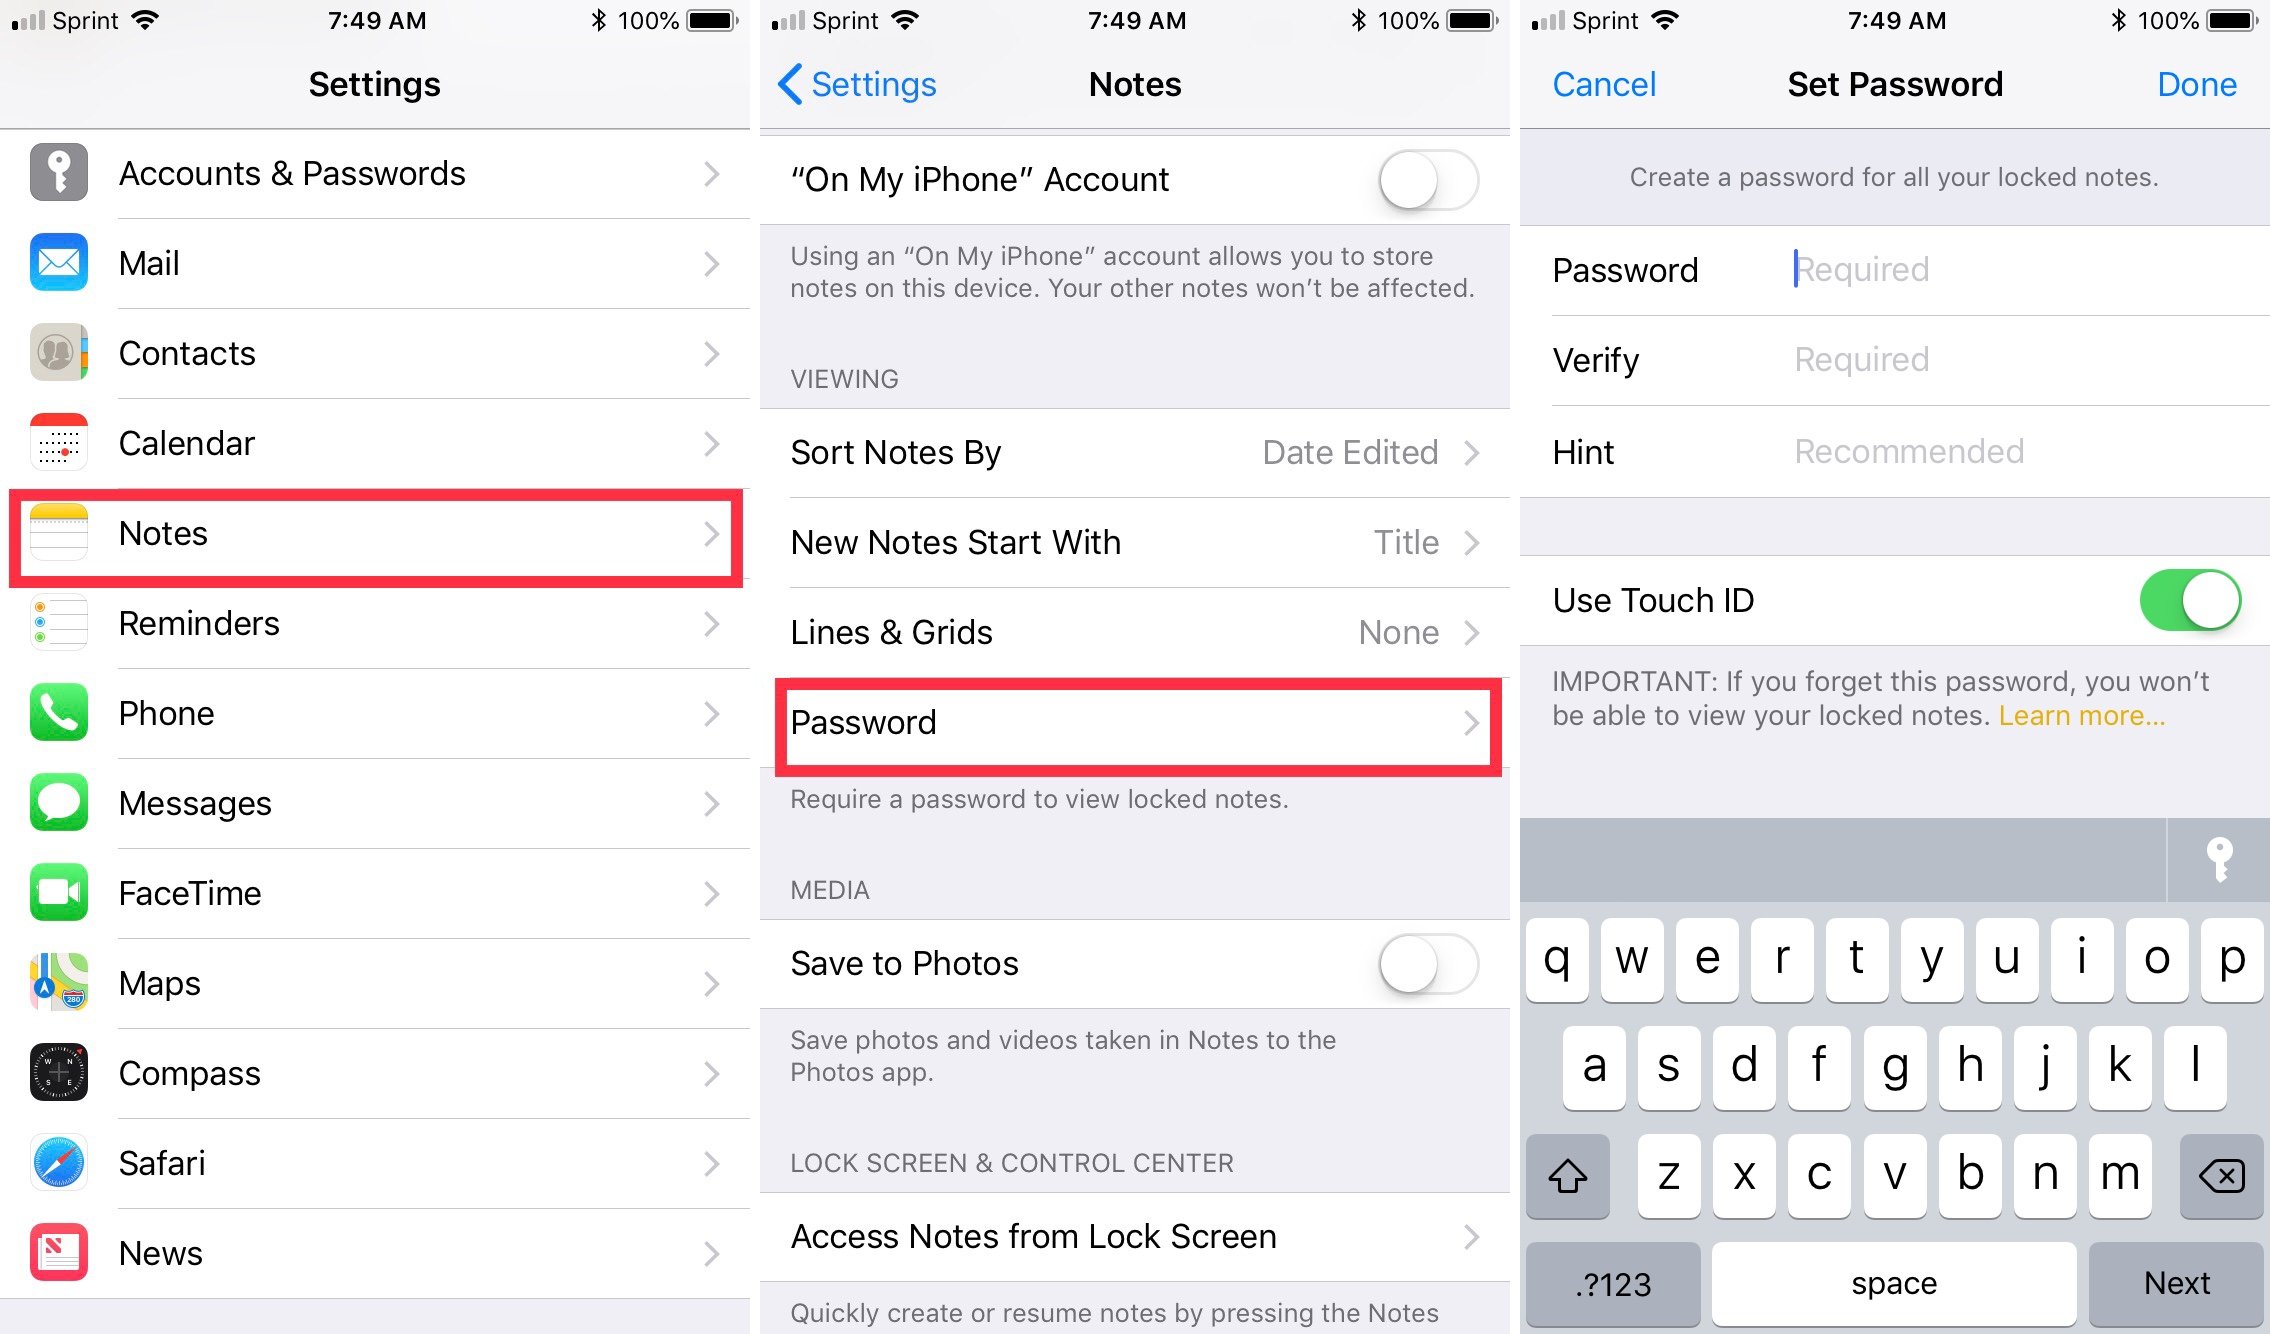 How to set up and use a password for the Notes app